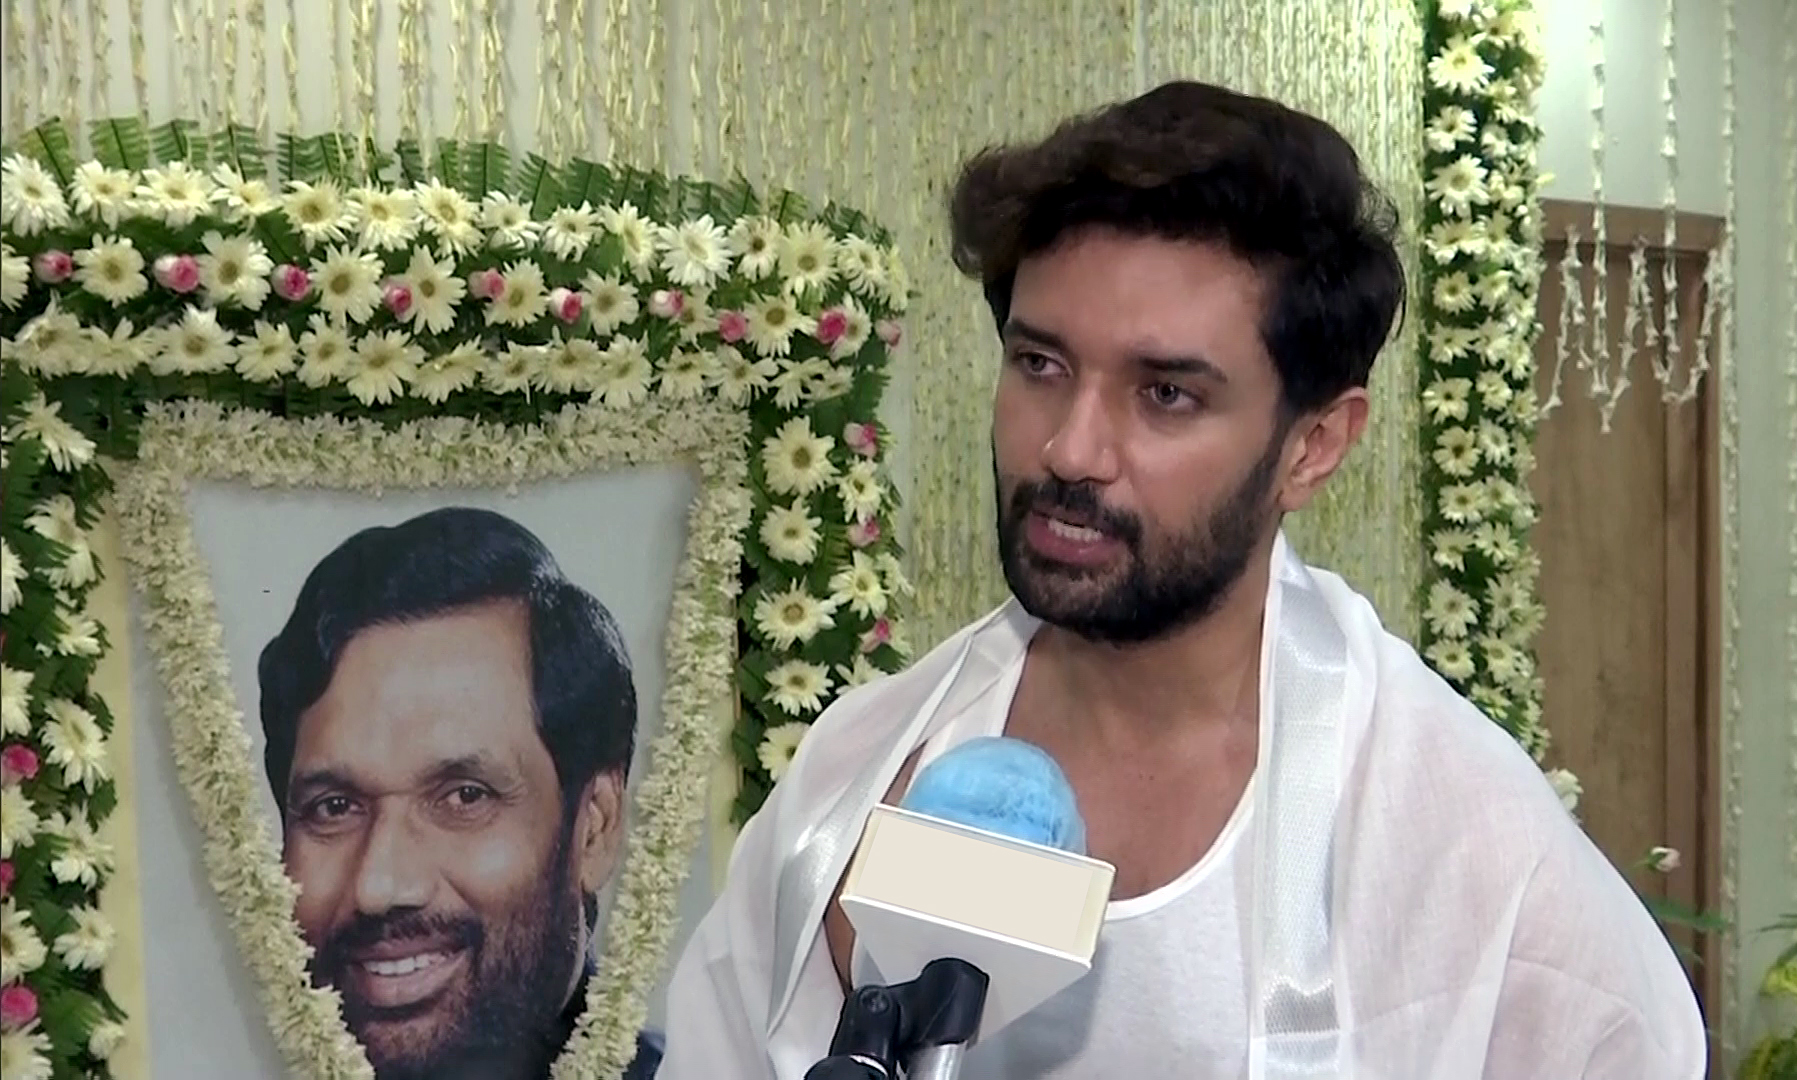 Bihar, Oct 16 (ANI): Chirag Paswan son of Union Minister Late Ram Vilas Paswan speaks to media as he performs rituals for his father, in Patna on Friday. (ANI Photo)